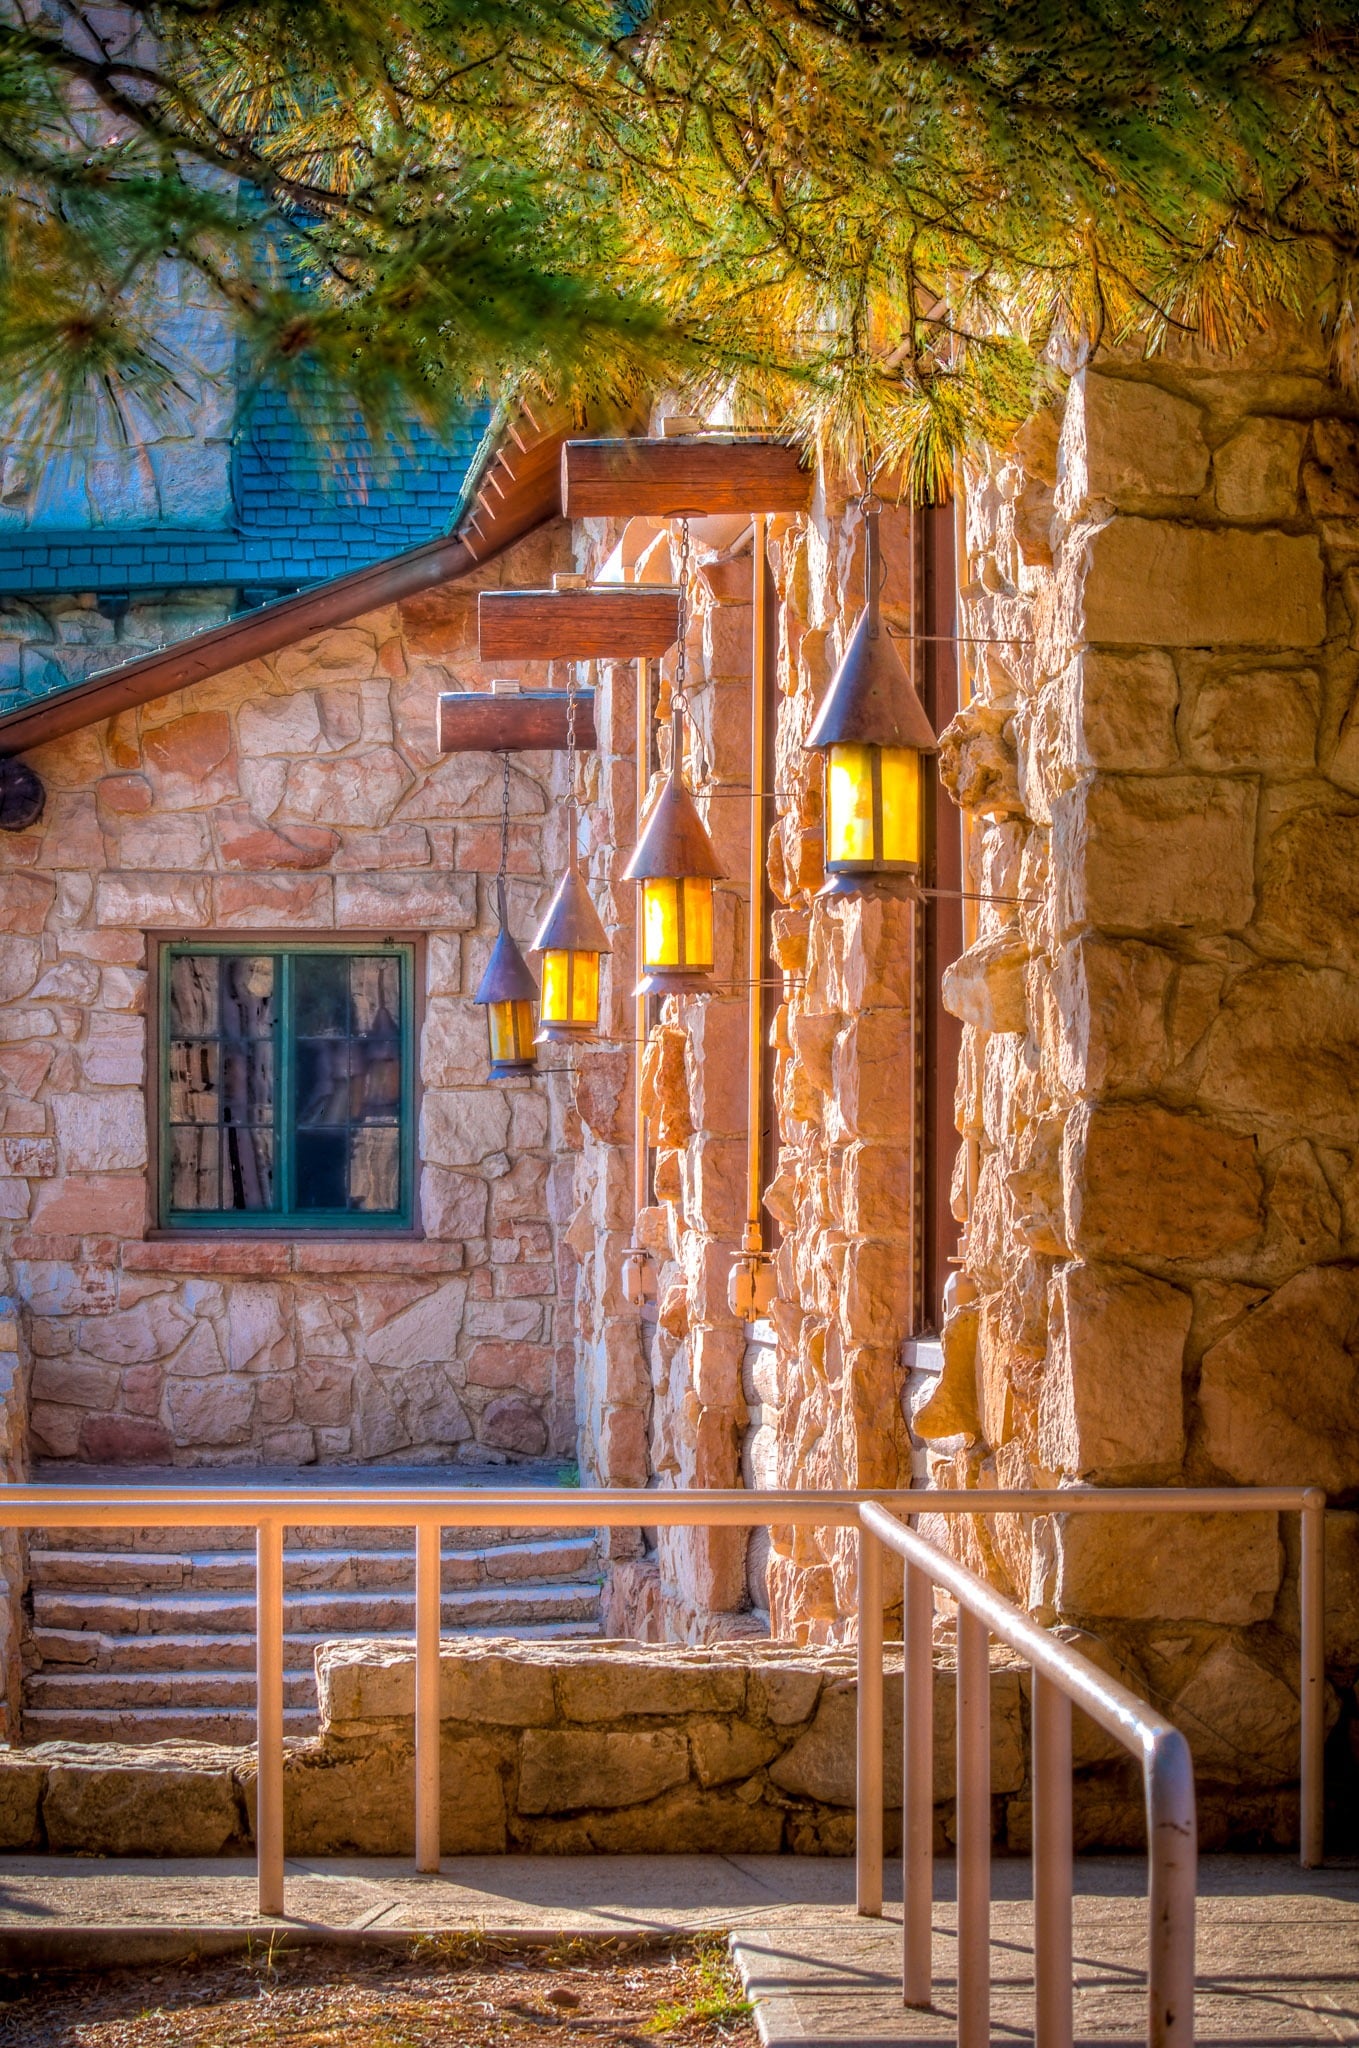 Back wall of the lodge at the North Rim of the Grand Canyon, with hanging lanterns. - Grand Canyon North Rim